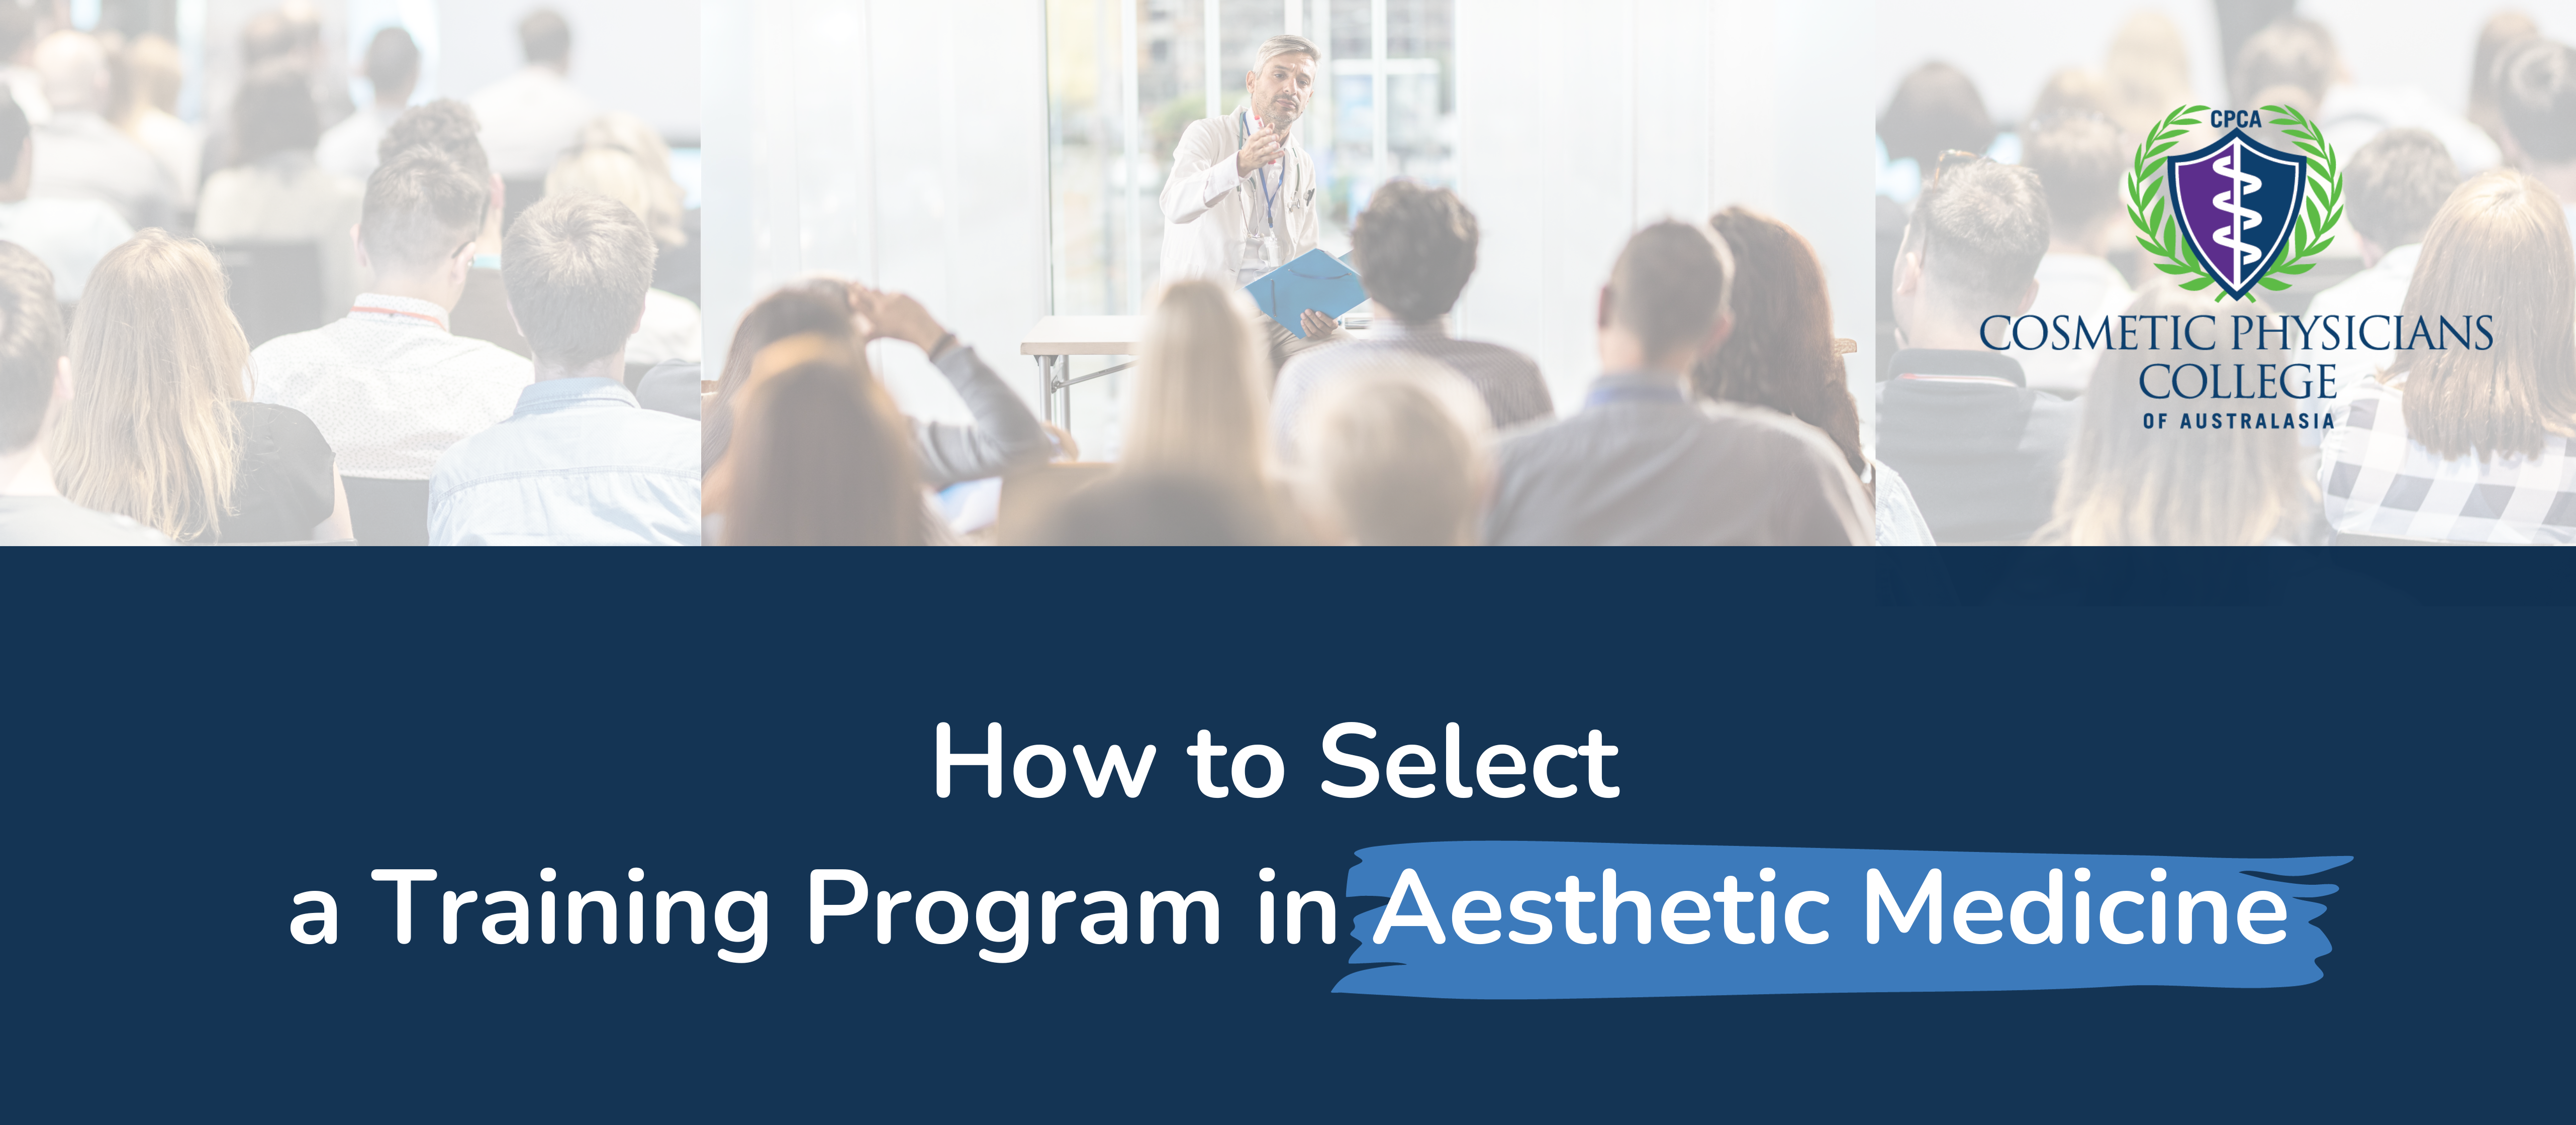 How to Select a Training Program in Aesthetic Medicine - Copy